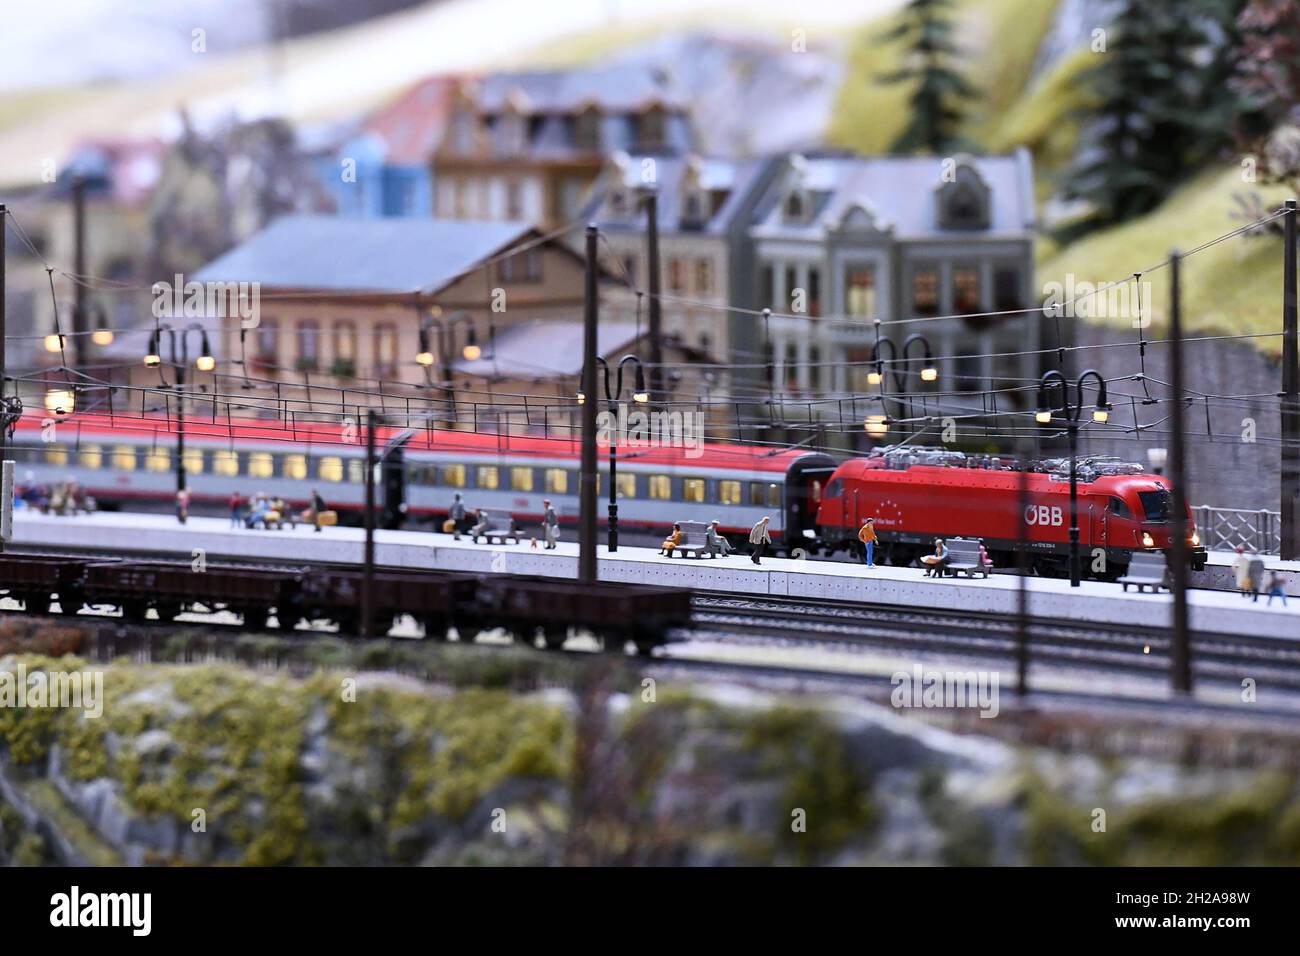 Modellbahn High Resolution Stock Photography and Images - Alamy